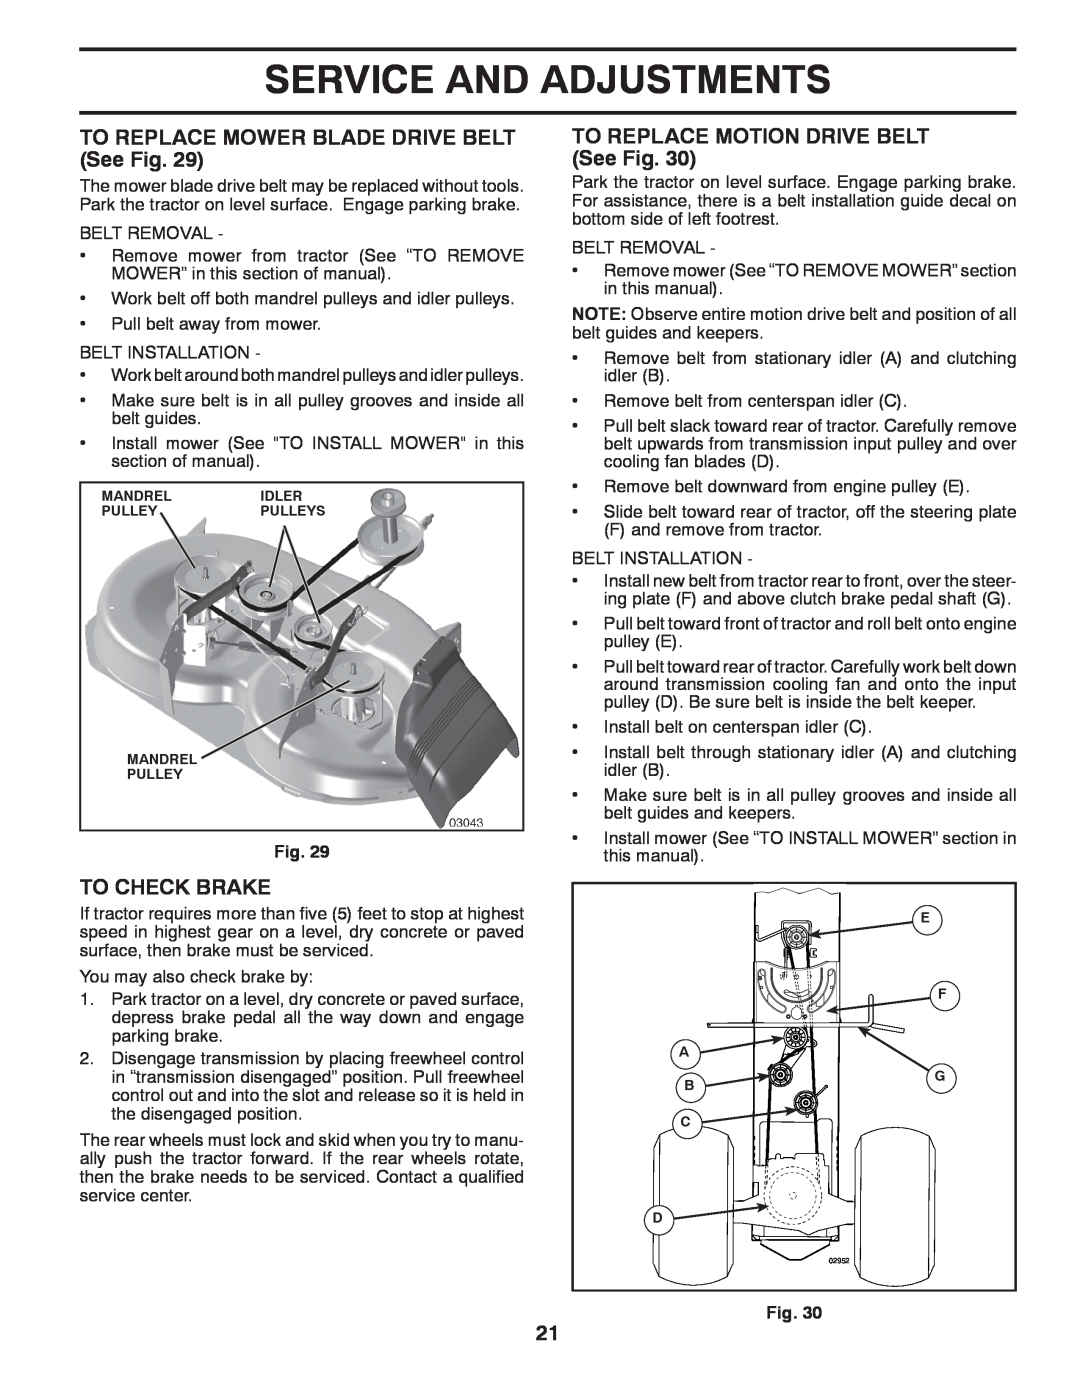 Poulan XT195H46YT manual TO REPLACE MOWER BLADE DRIVE BELT See Fig, To Check Brake, TO REPLACE MOTION DRIVE BELT See Fig 